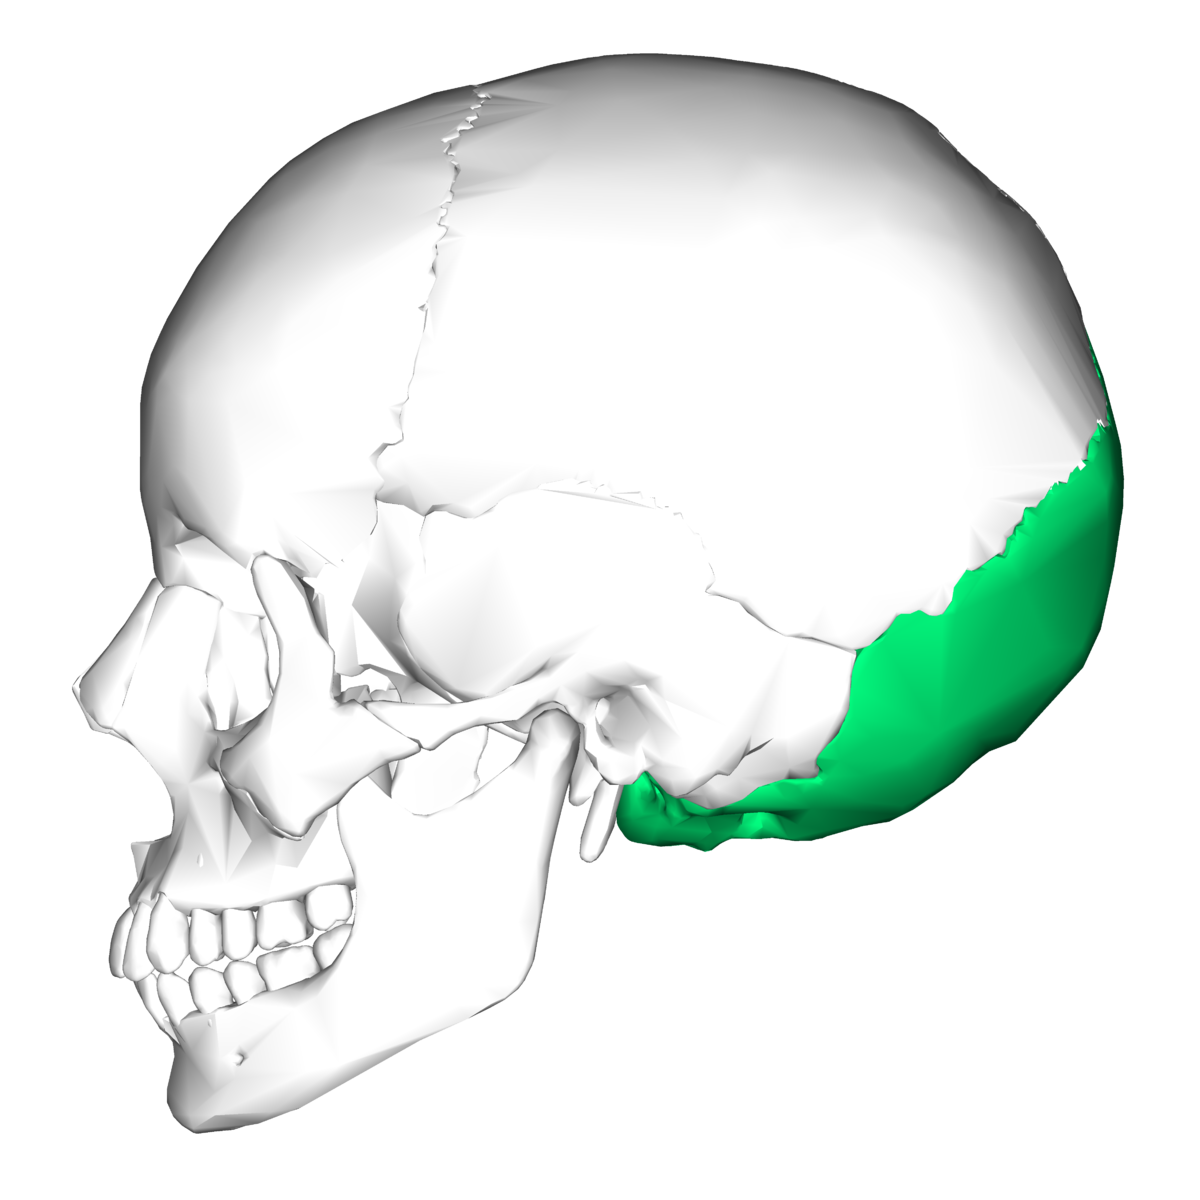 <p>posterior; Referring to the back of the head or the occipital bone, which forms the back and base of the skull.</p>